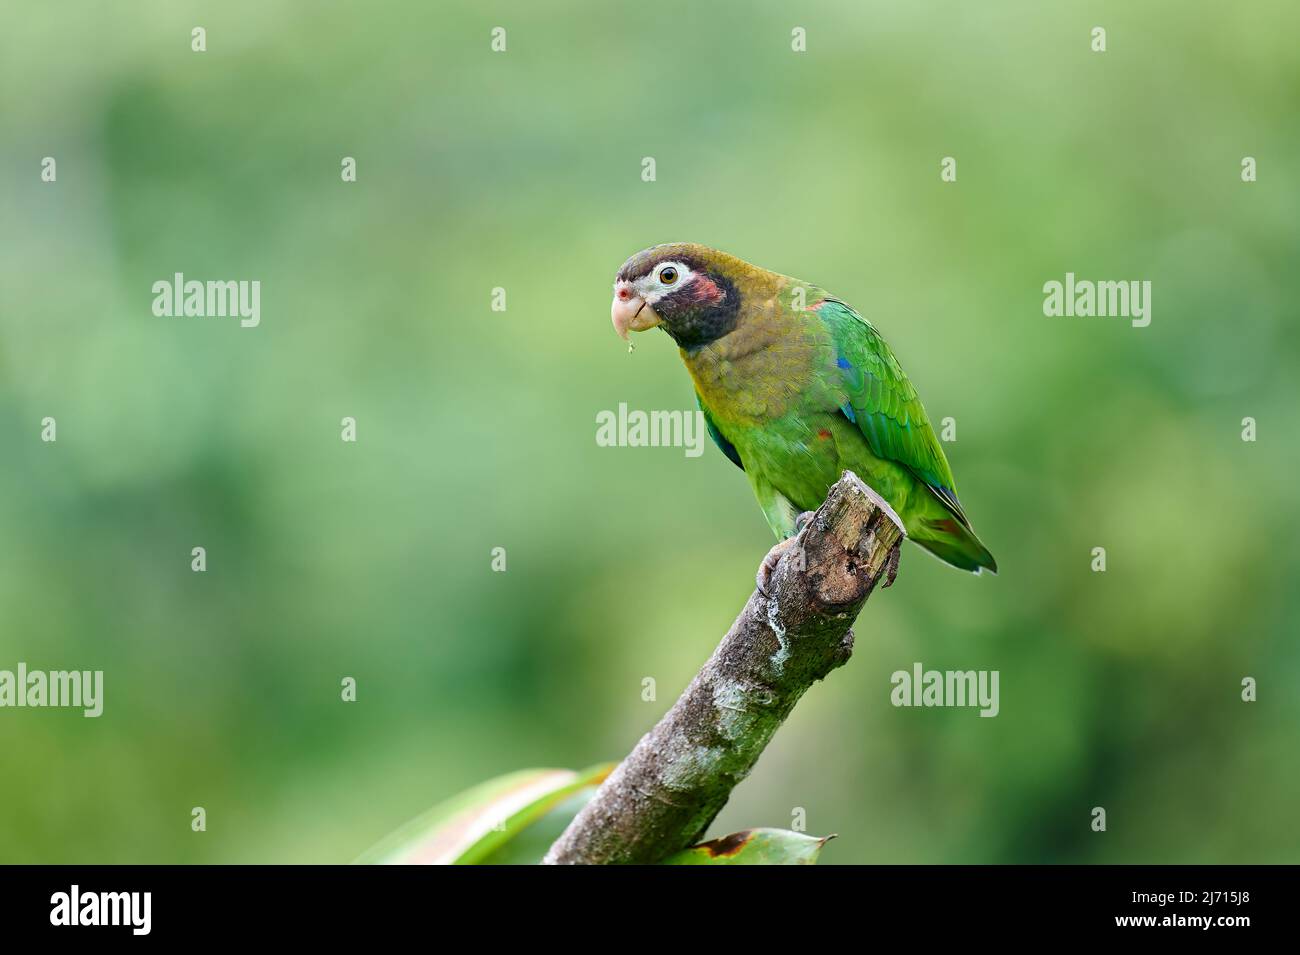 Brown-hooded Parrot (Pyrilia haematotis) perched on a tree branch. Maquenque Eco Lodge, Costa Rica, Central America Stock Photo